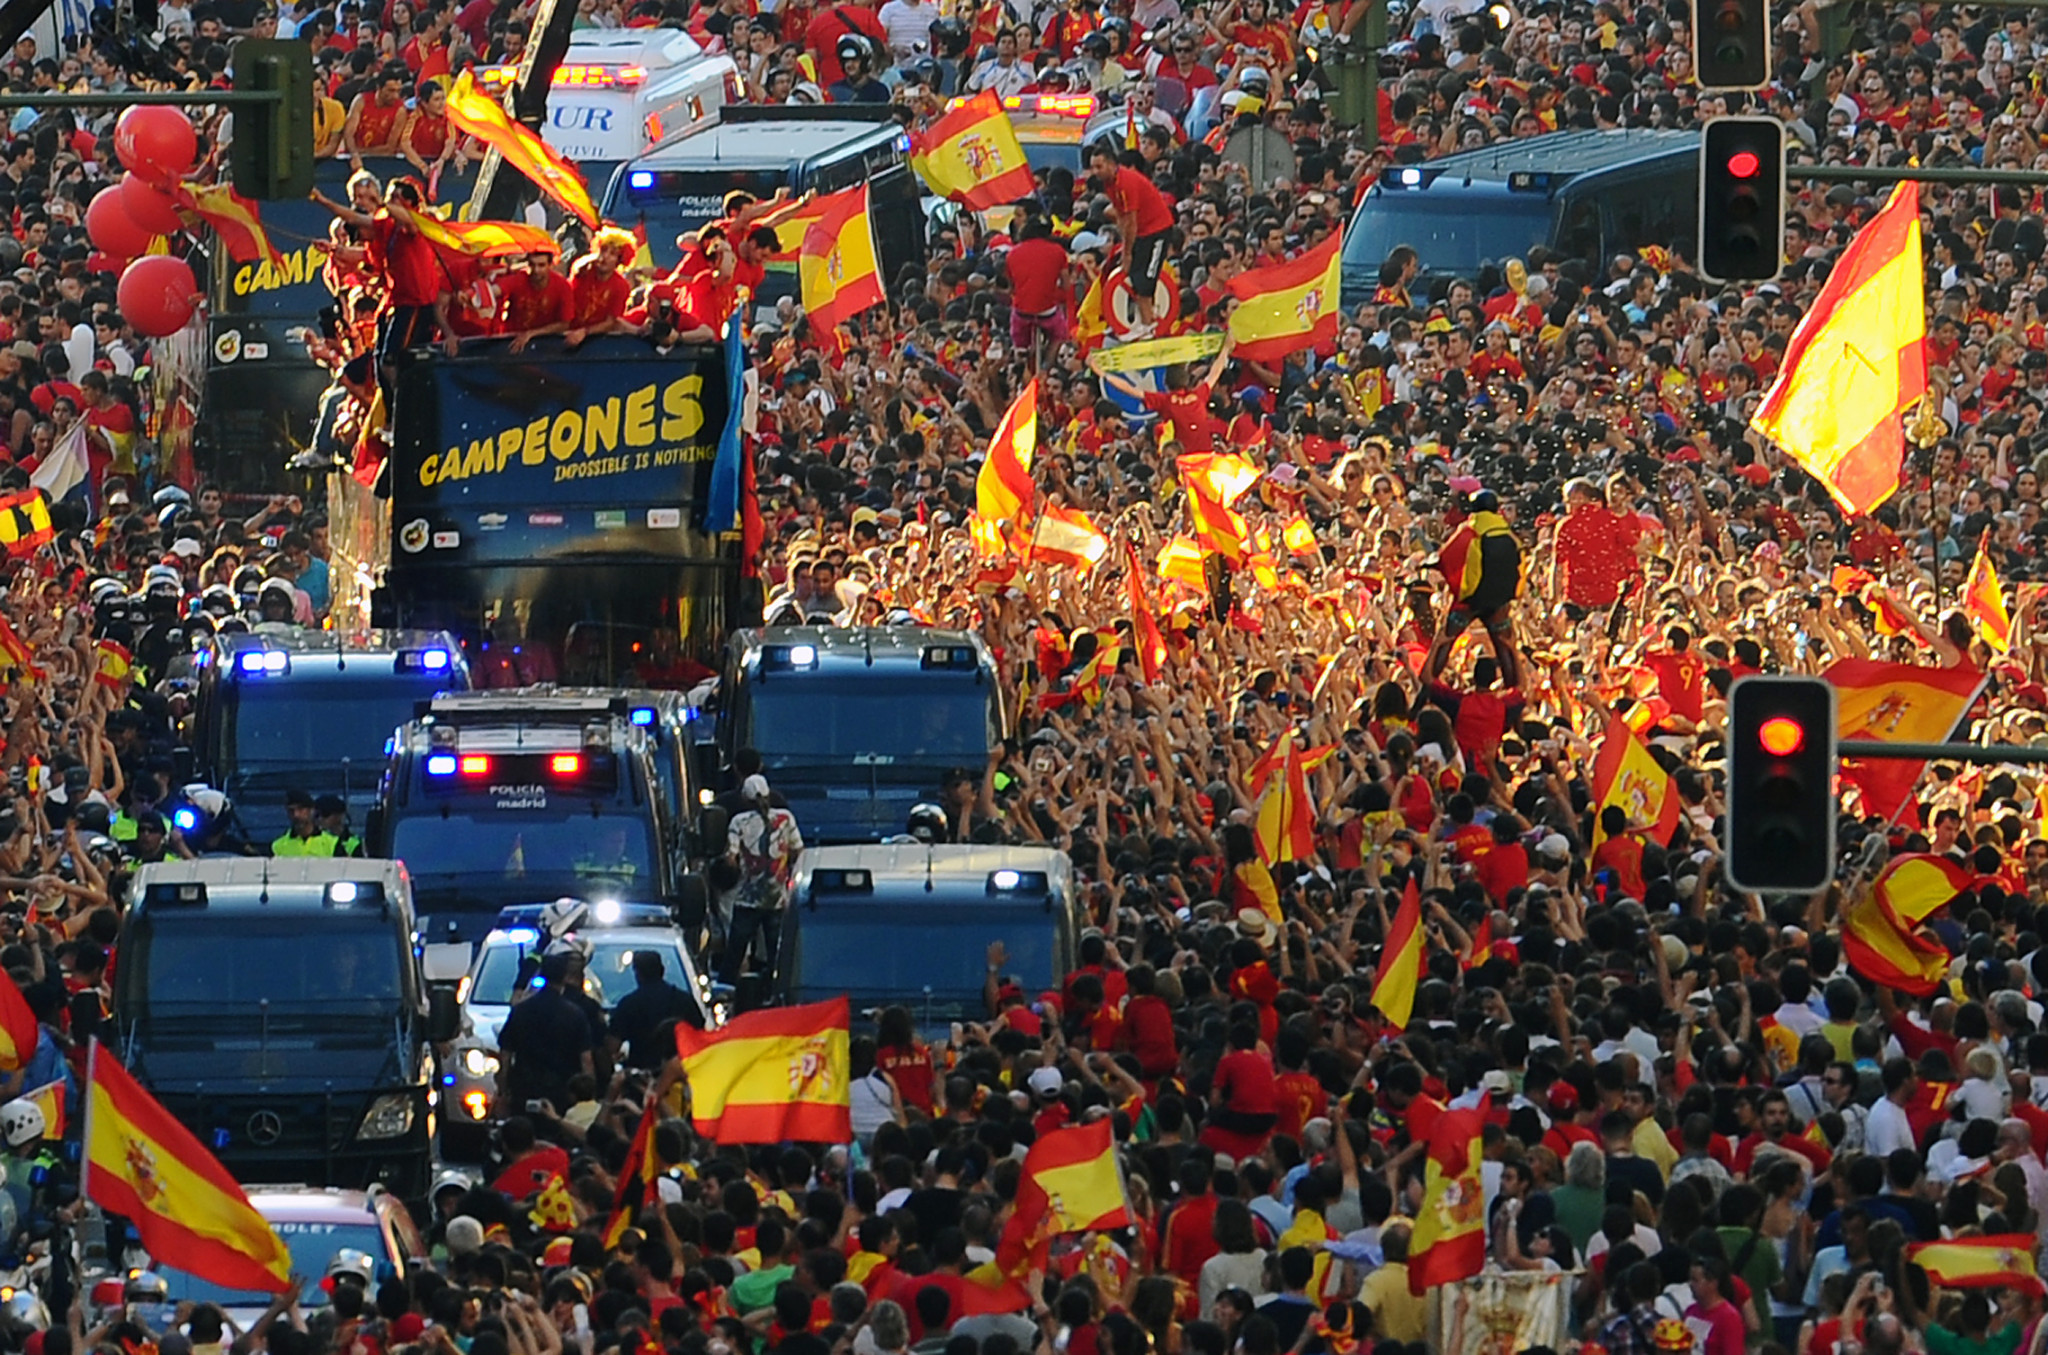 Spain's team parade through the streets after winning the 2010 FIFA World Cup ©Getty Images